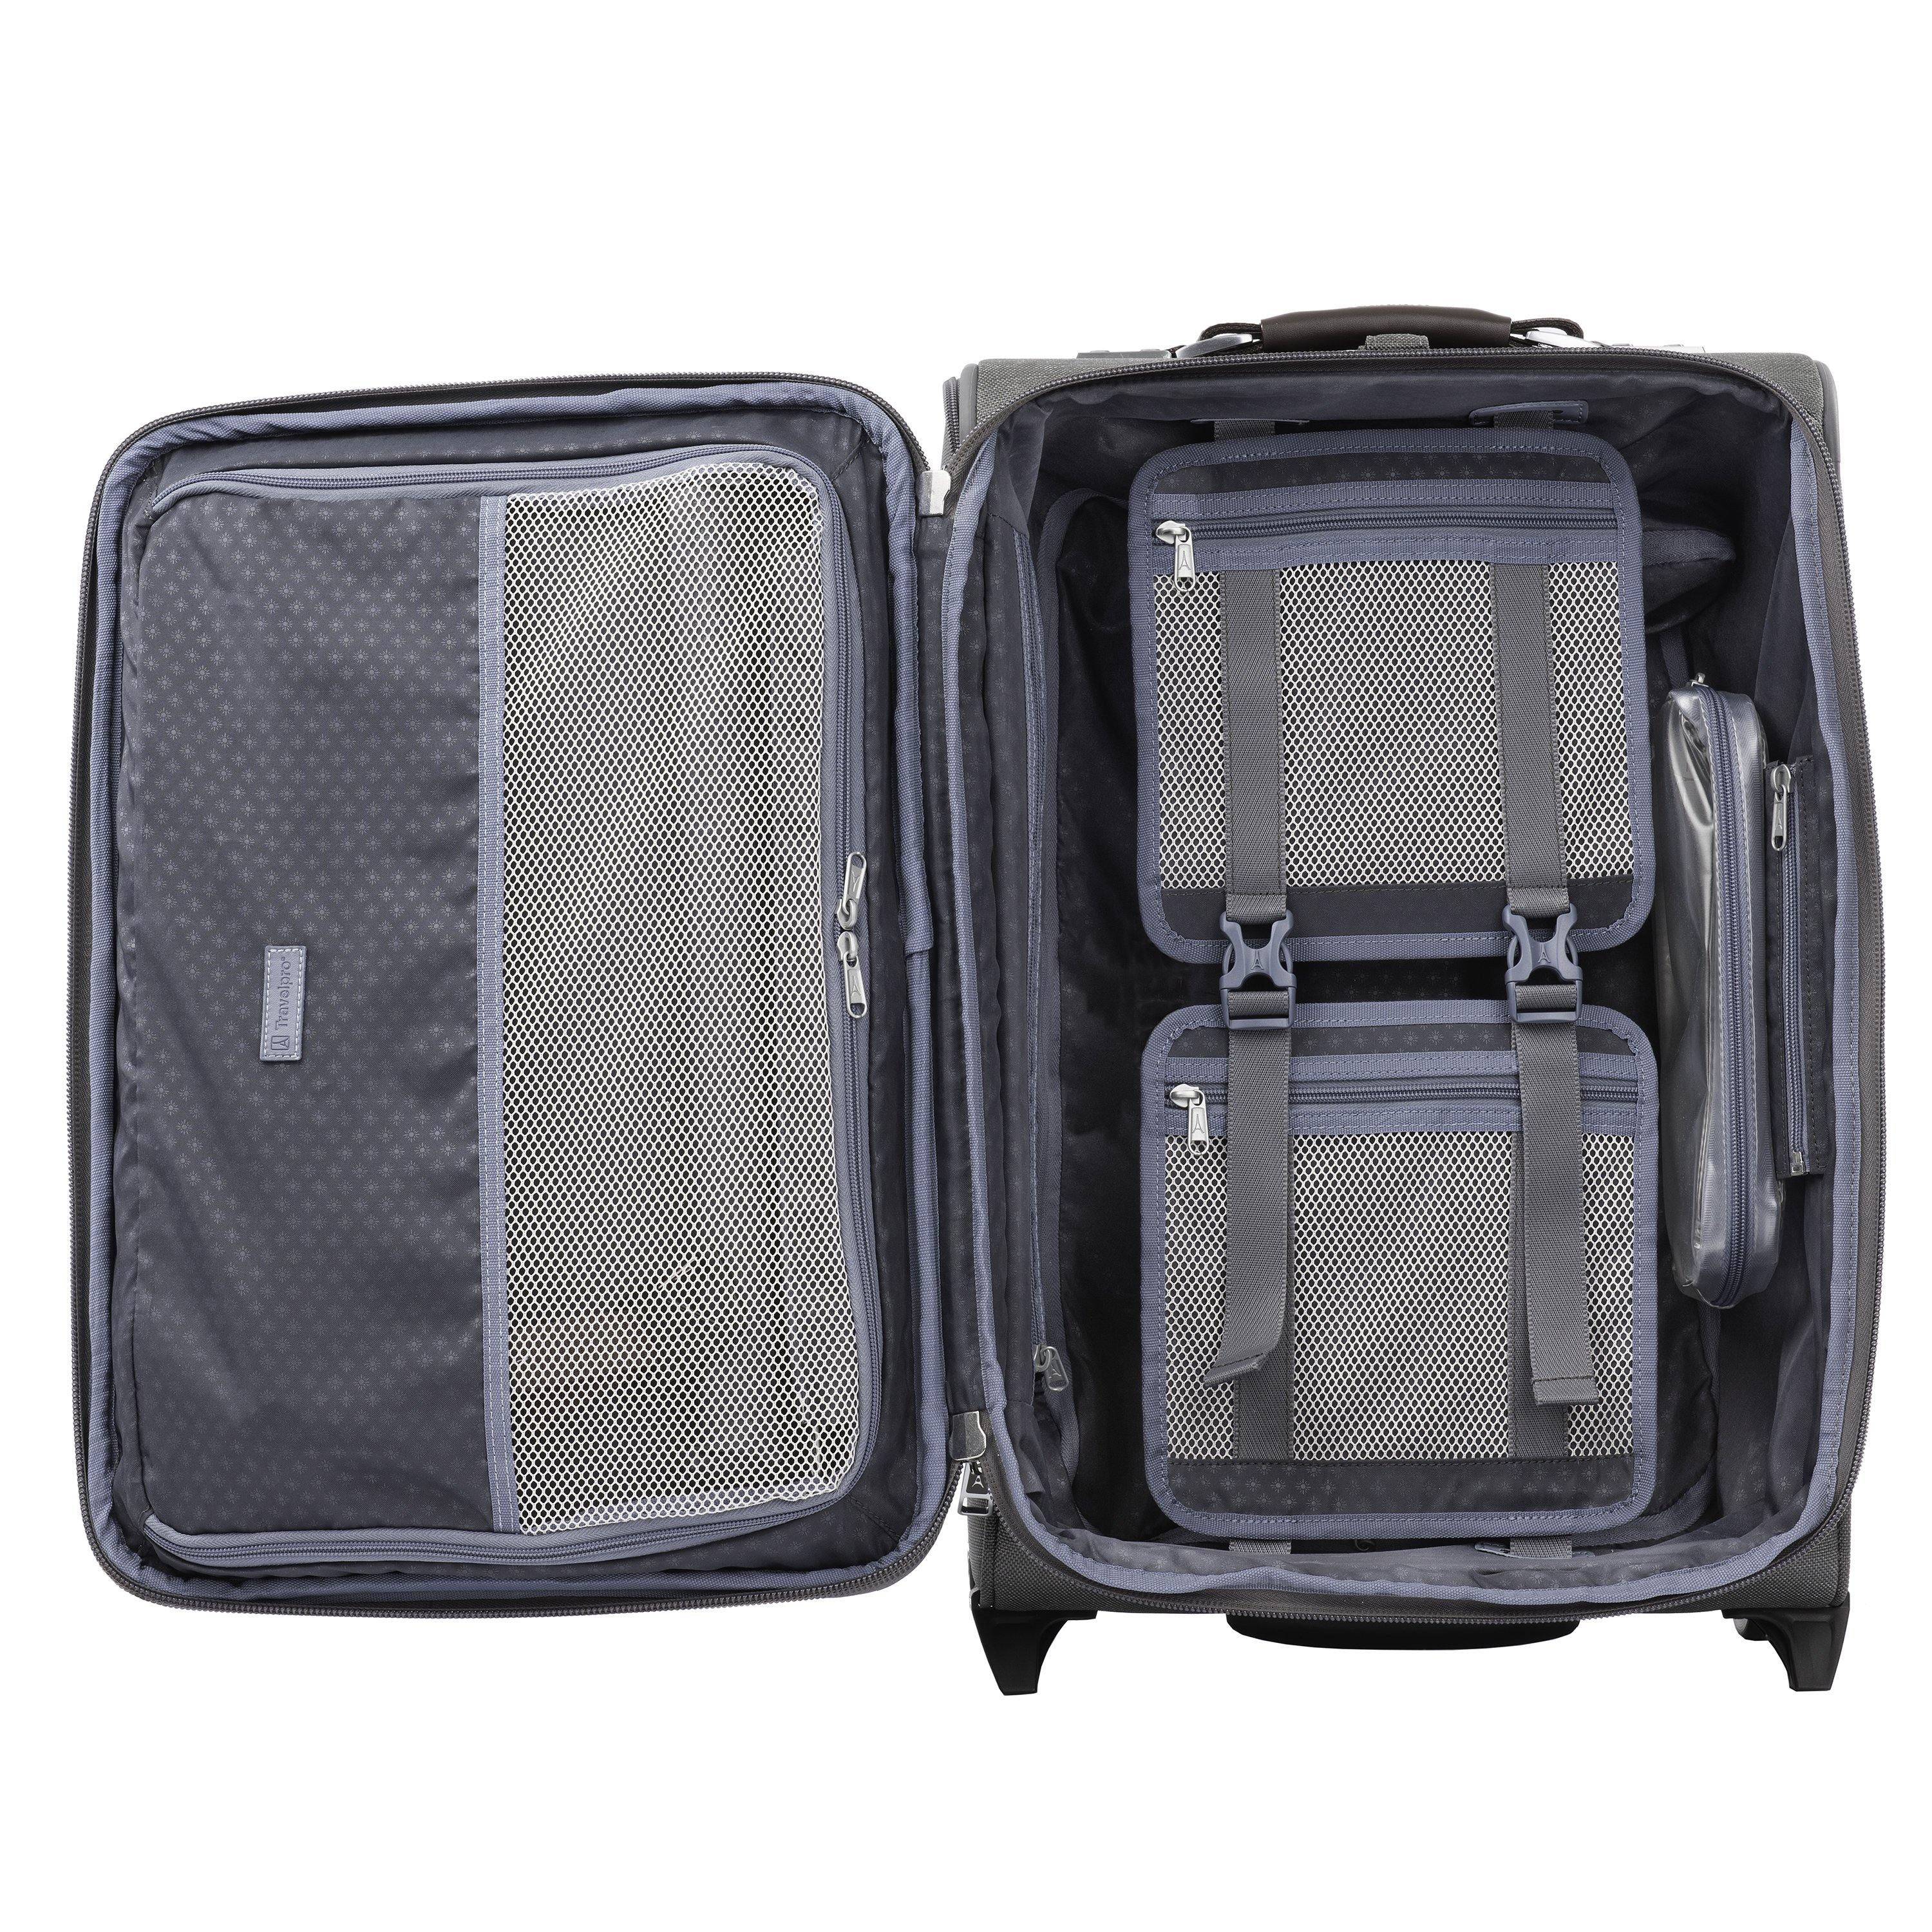 Travel Bag Luggage Suitcase Wheels  Rolling Luggage Trolley Case - Carry  Suitcase - Aliexpress